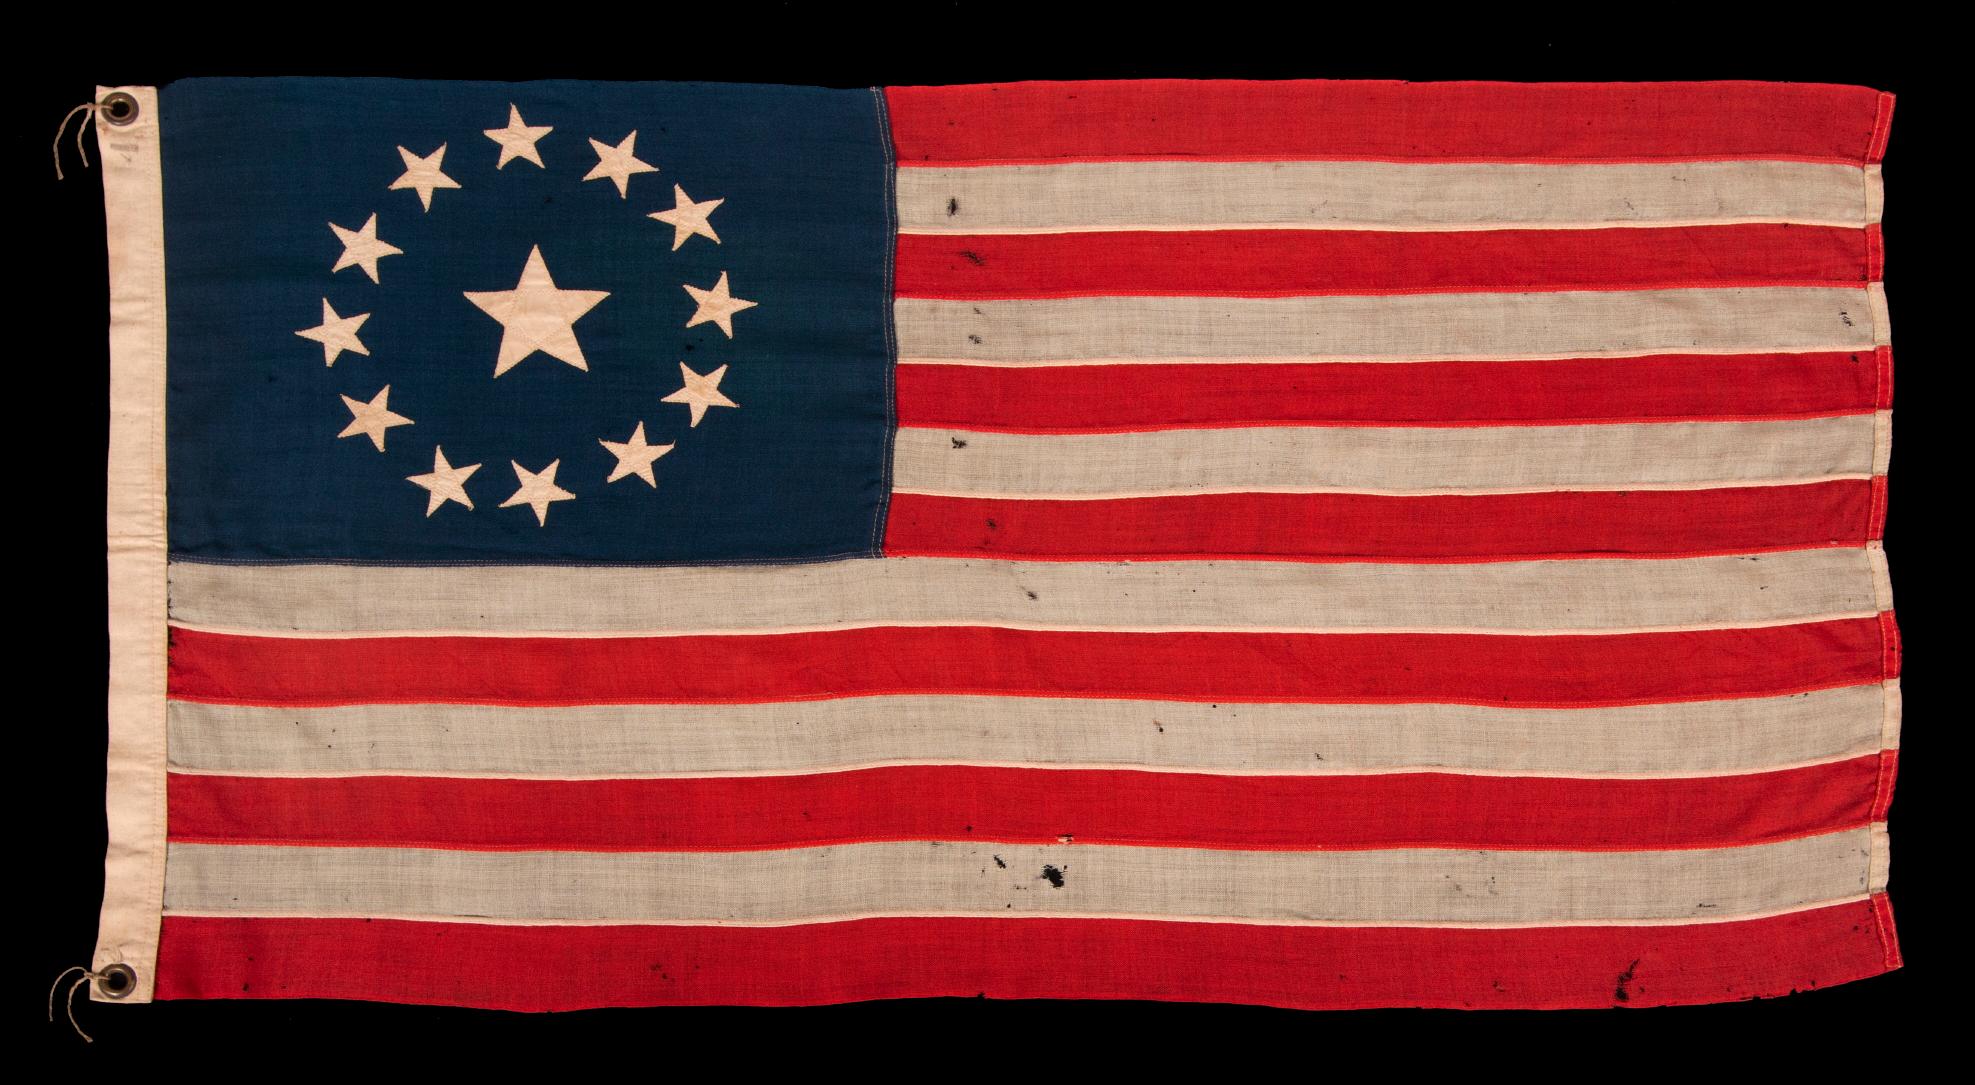 13 star antique American flag, with a circular arrangement of what is known as the 3rd Maryland pattern, on a small scale example with beautiful, elongated proportions and an unusually large center star, made circa 1890-1900

13 star flags have